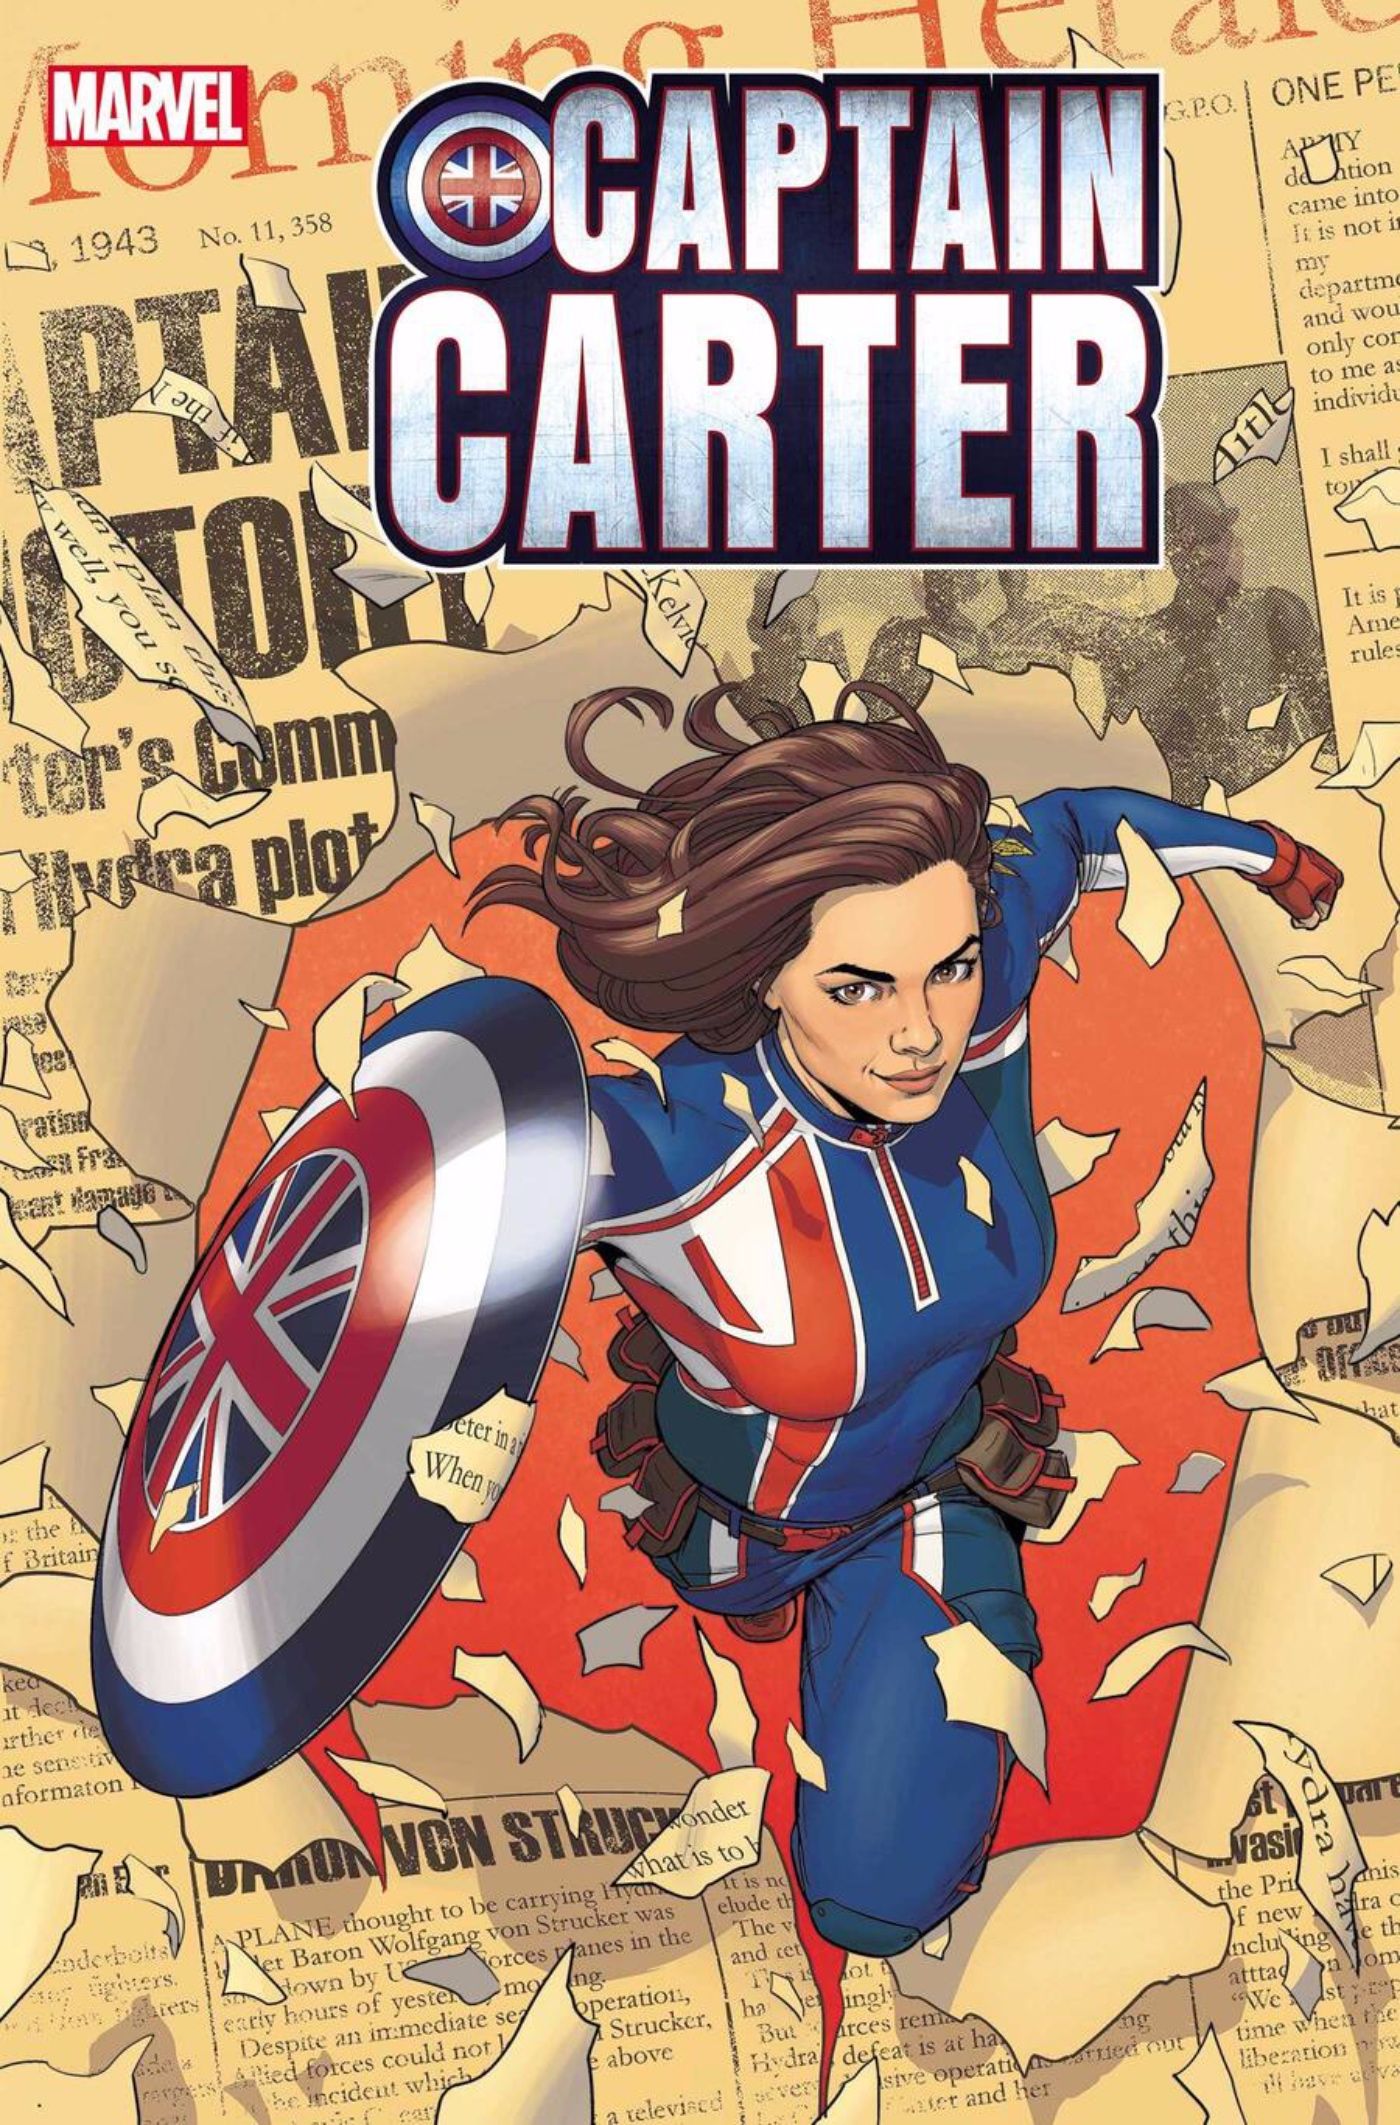 Peggy Carter is Getting A Marvel Comic Series (and New Costume)